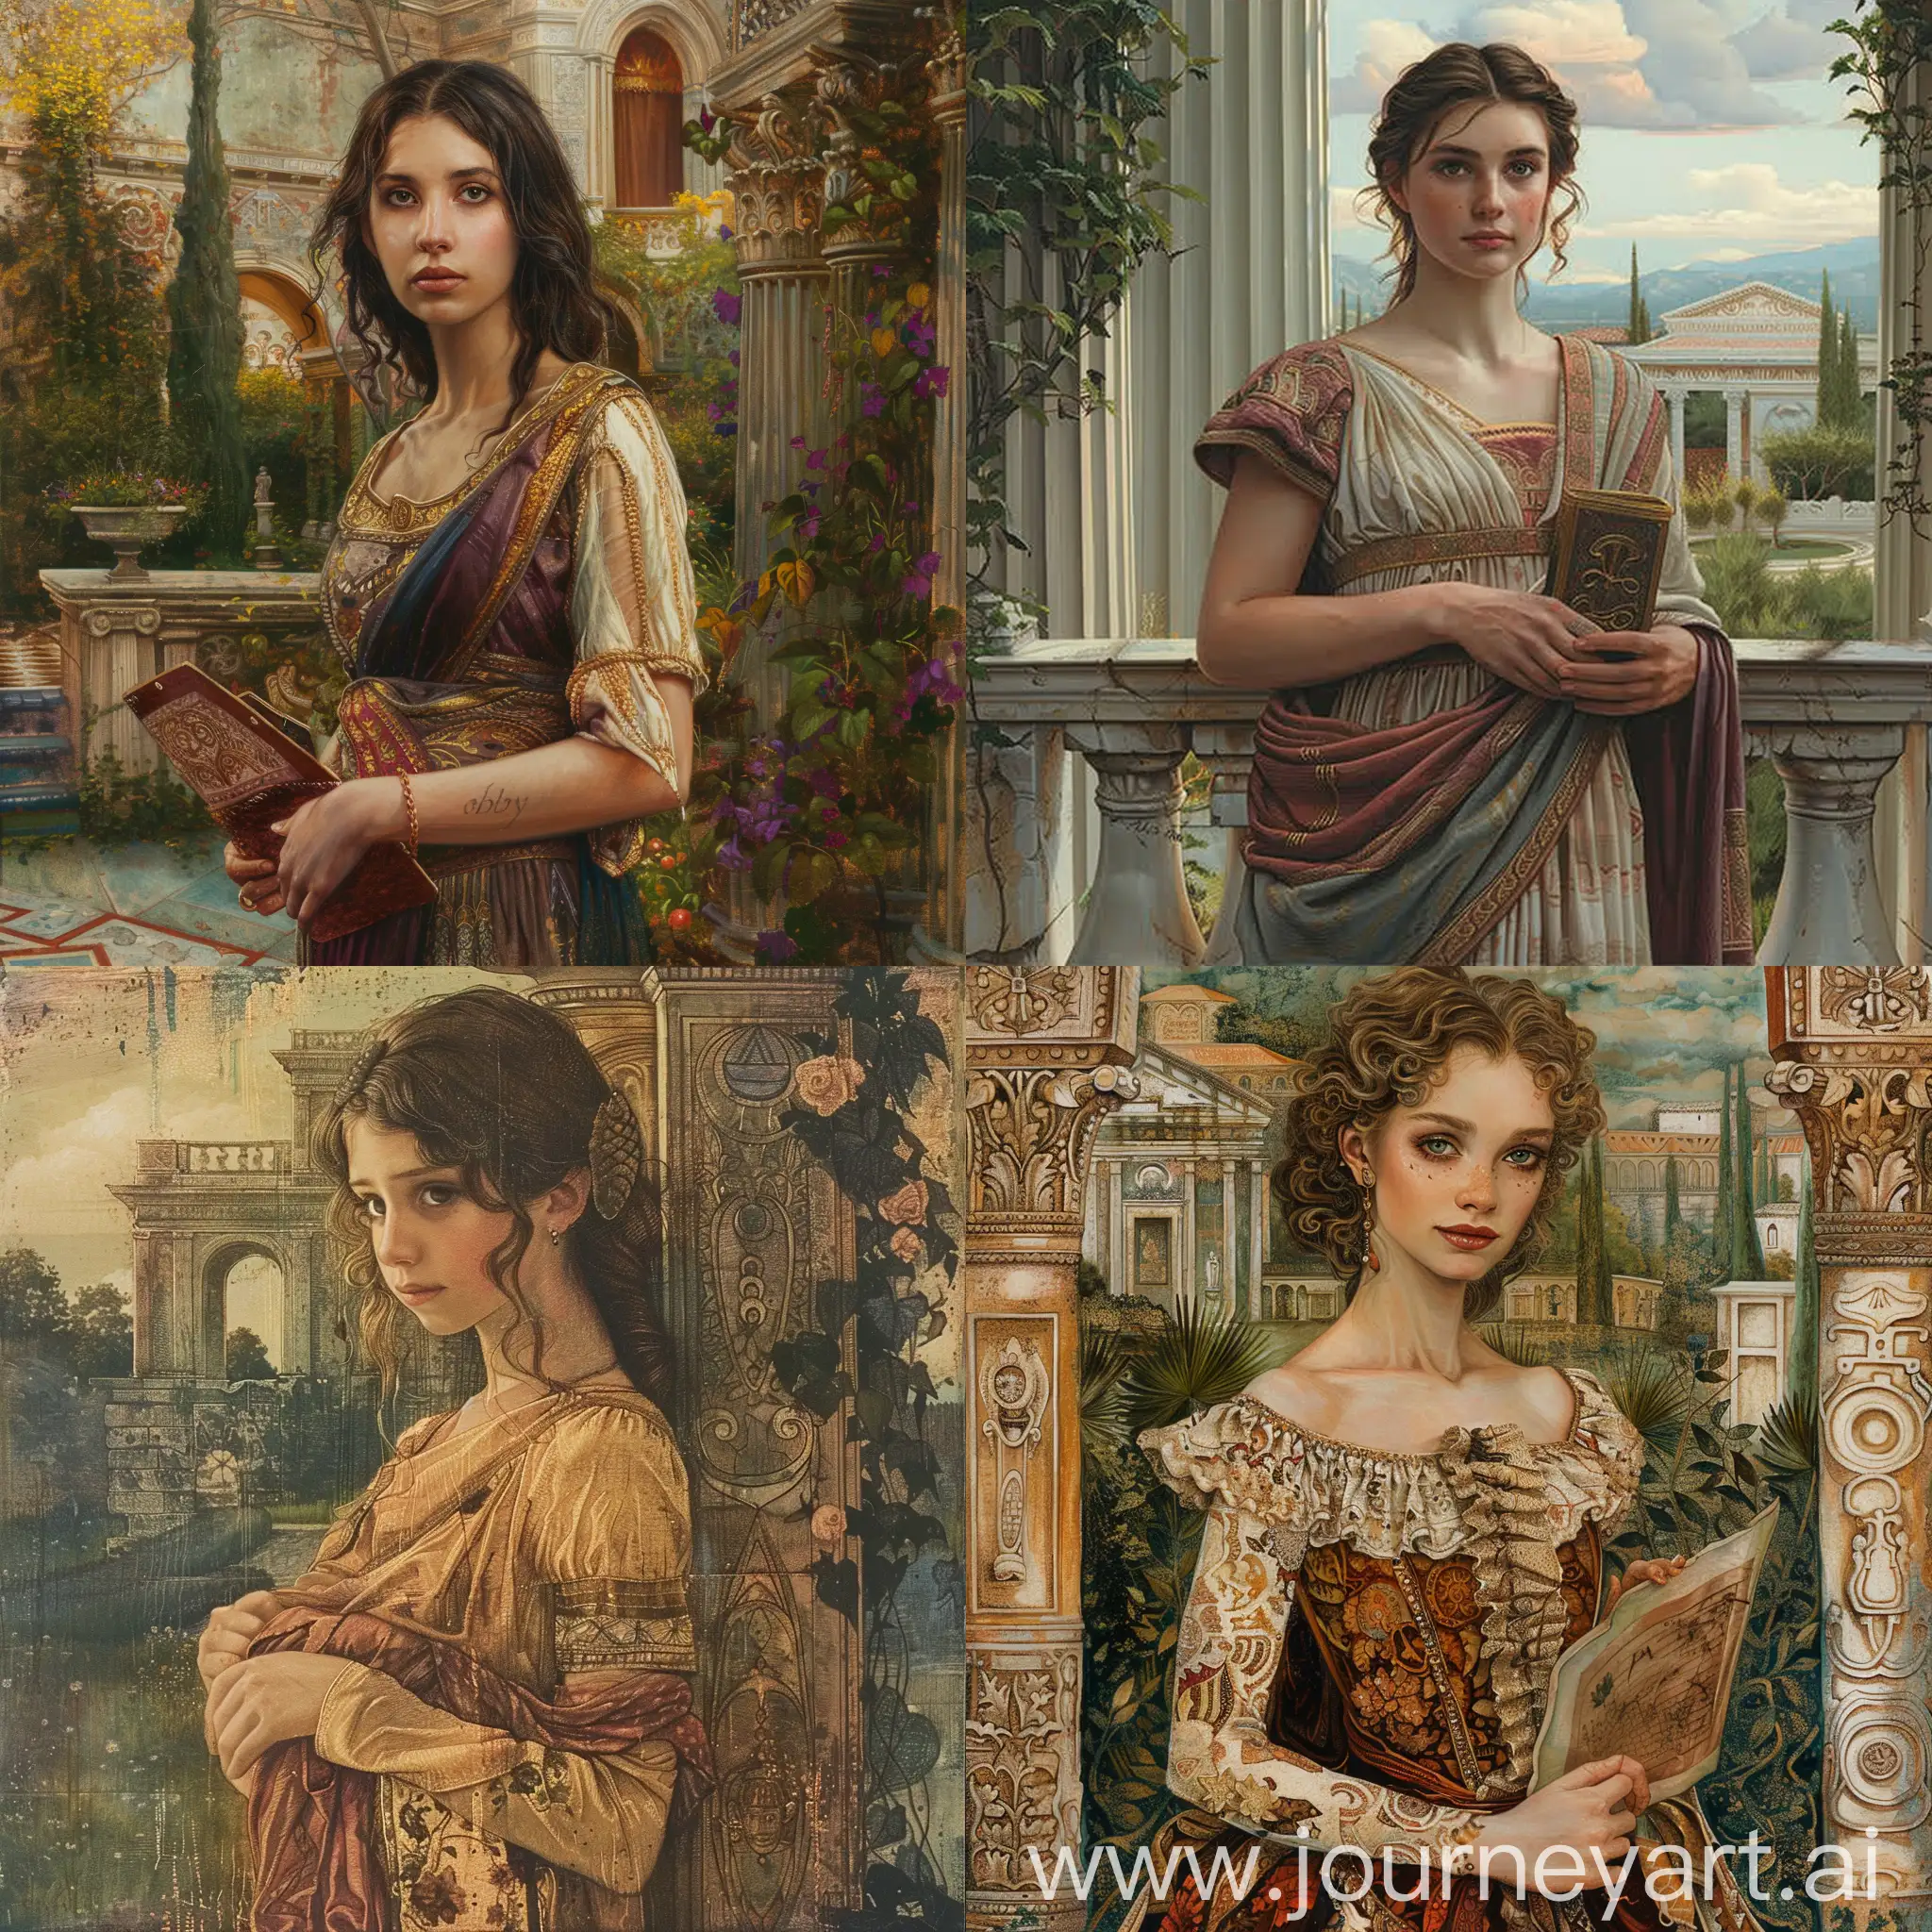 Renaissance-Painting-of-an-Ancient-Girl-in-Traditional-Attire-with-Serene-Expression-and-Classical-Background